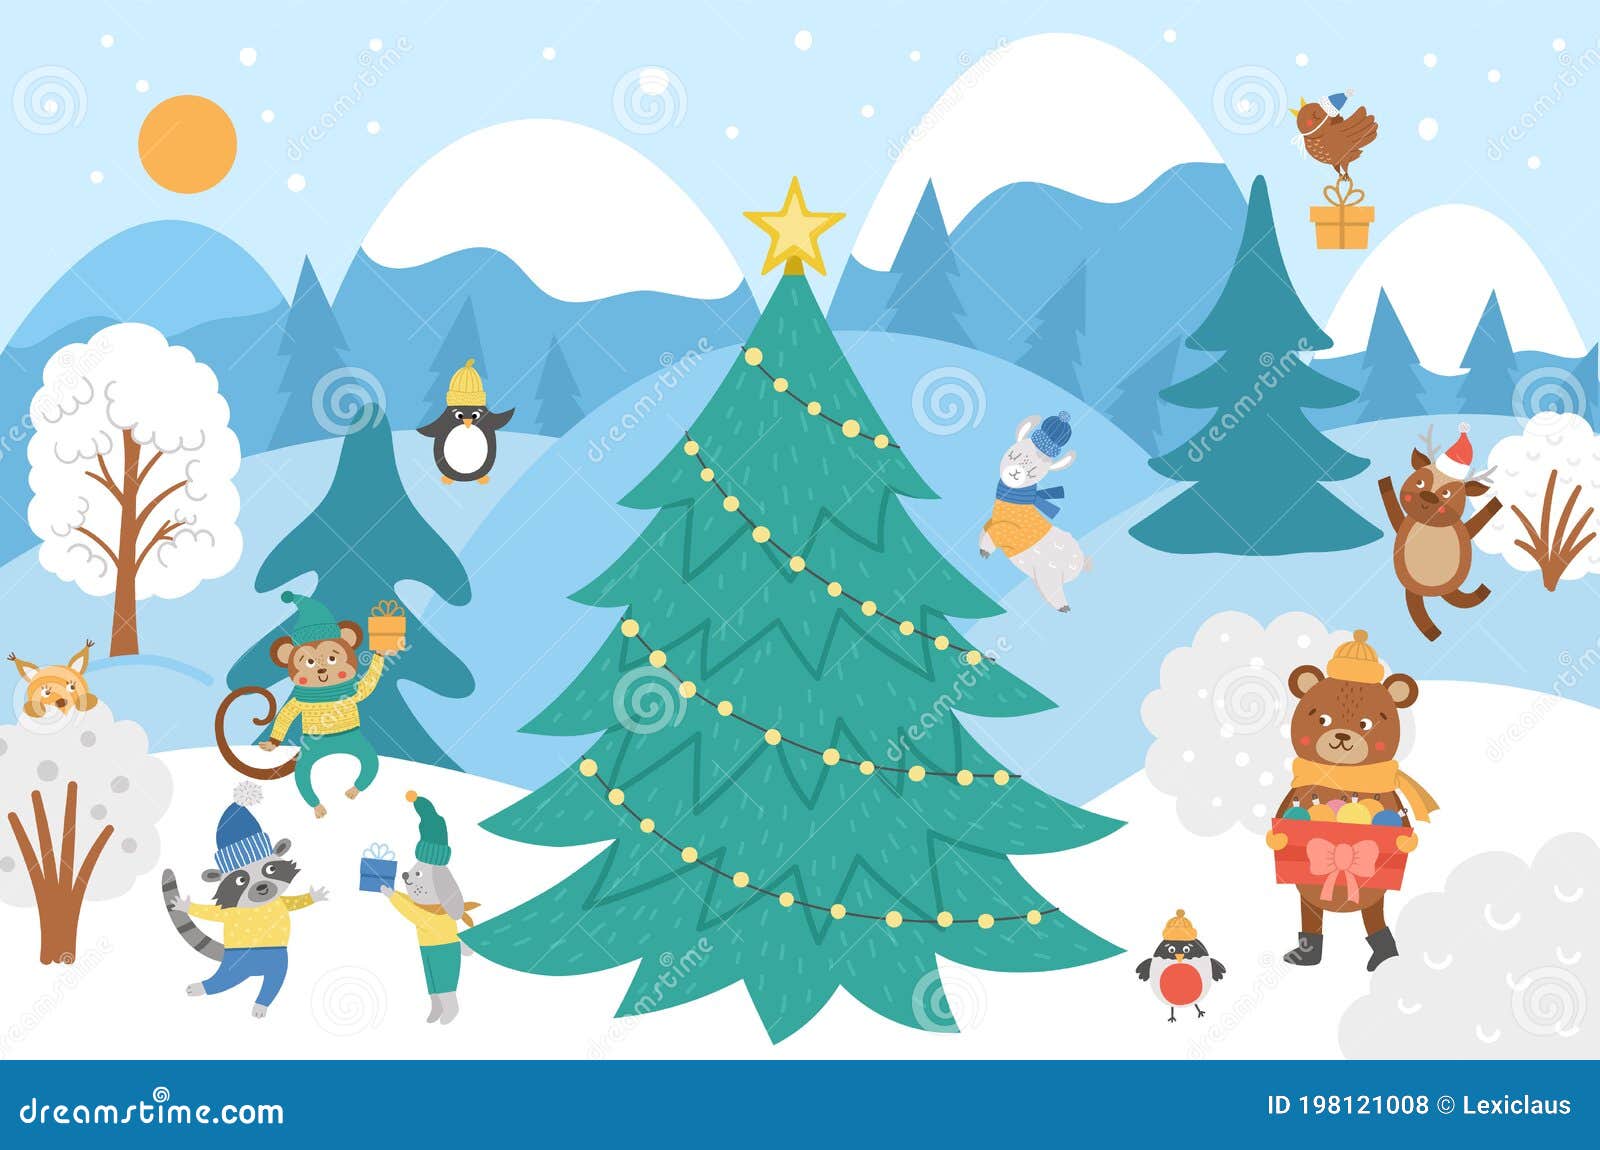 Winter Forest Clipart Stock Illustrations 2 763 Winter Forest Clipart Stock Illustrations Vectors Clipart Dreamstime